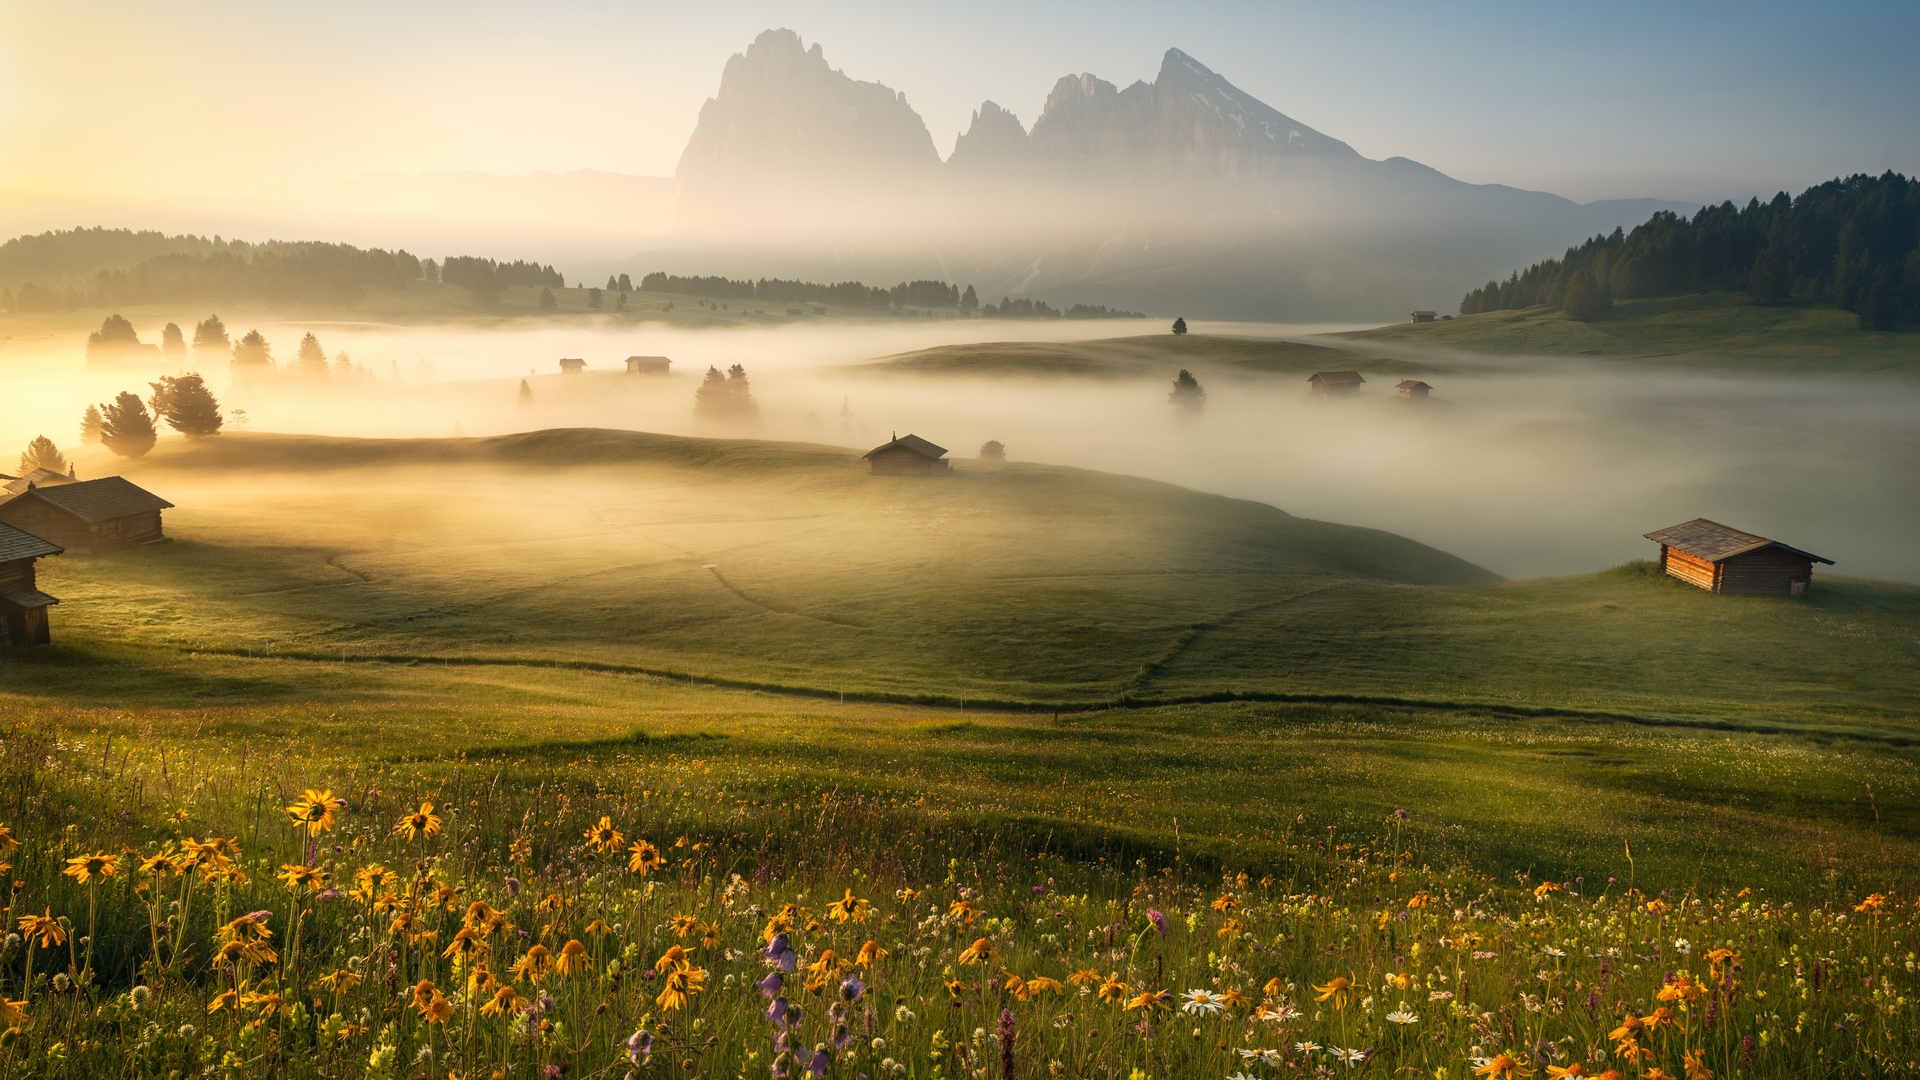 General 1920x1080 nature landscape trees mountains hills flowers field mist cabin forest Dolomites Alps